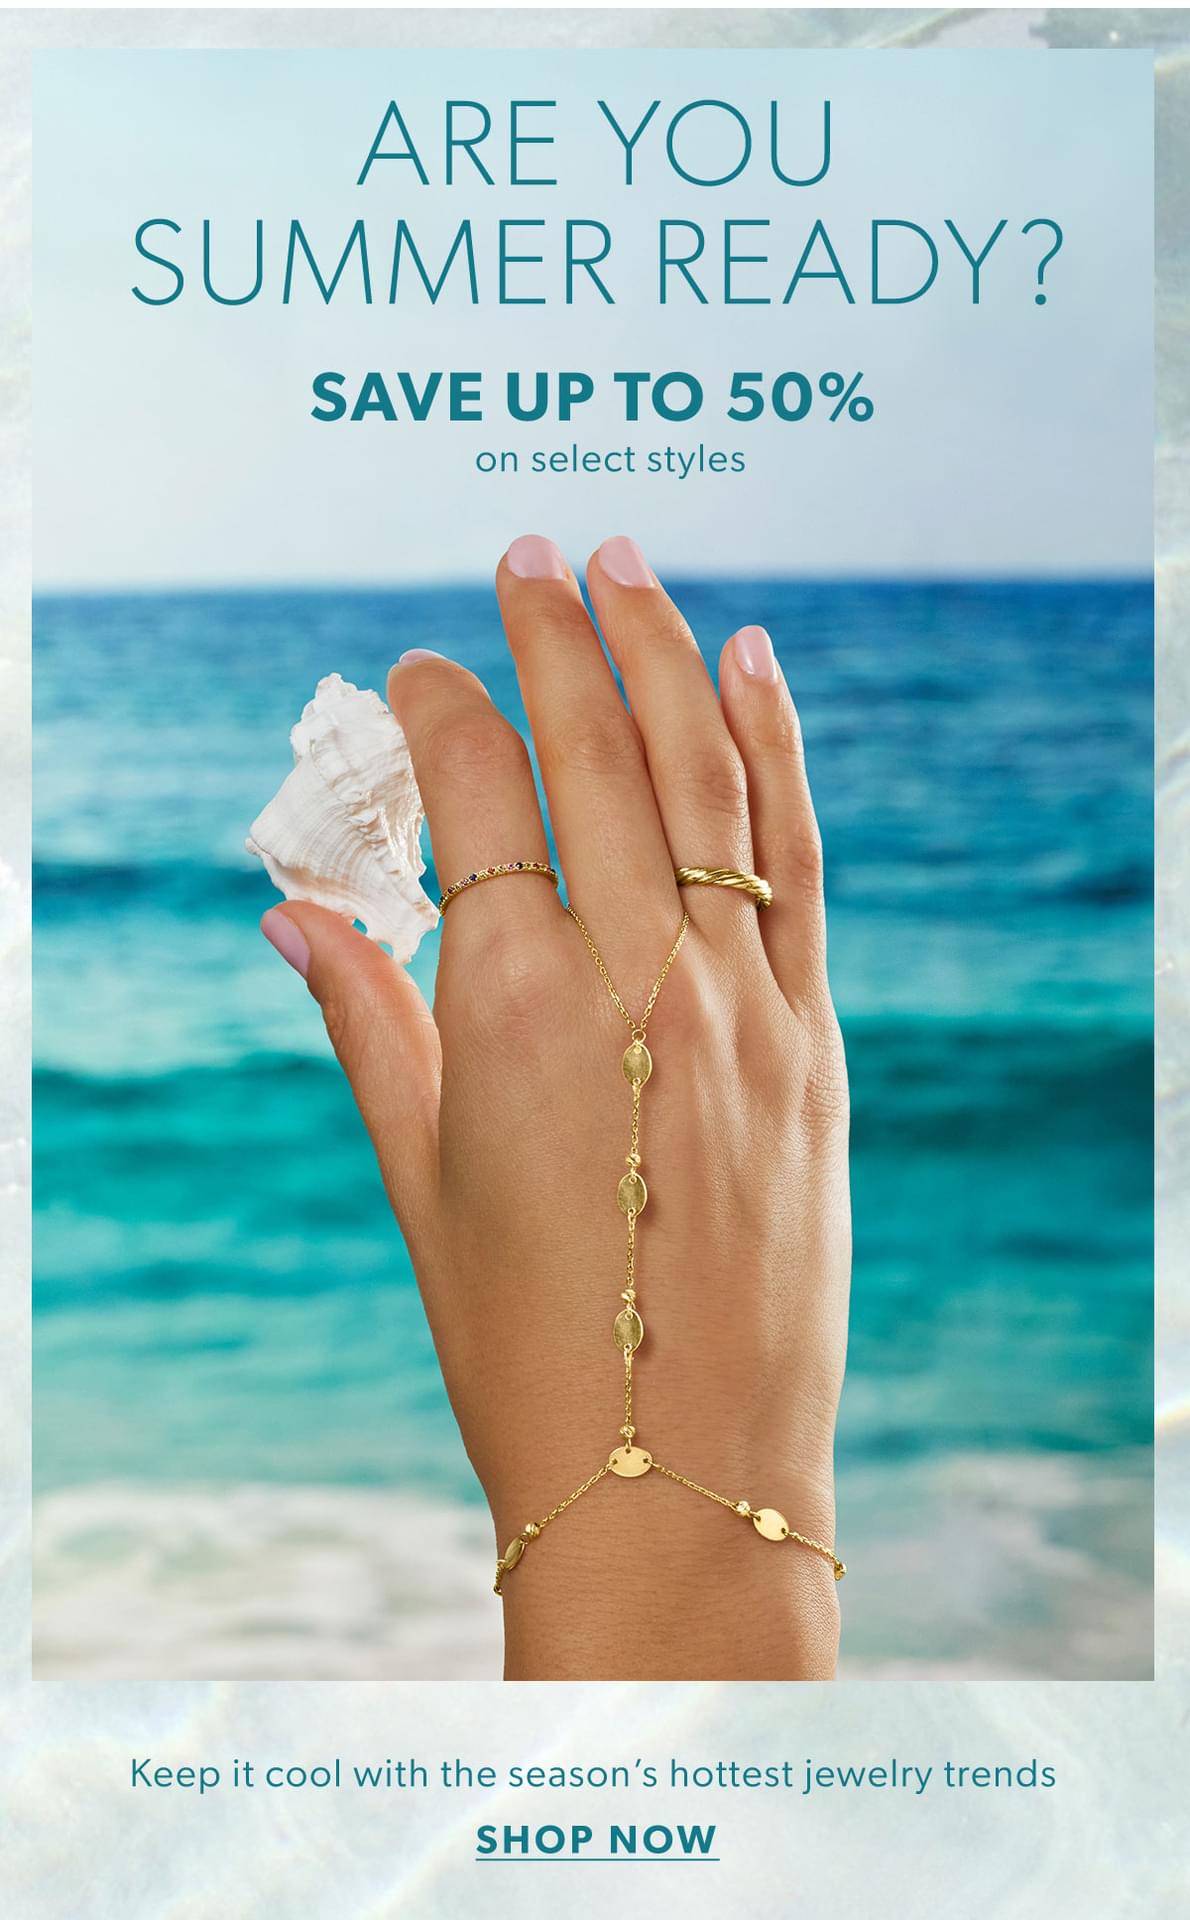 Are You Summer Ready? Save Up To 50%